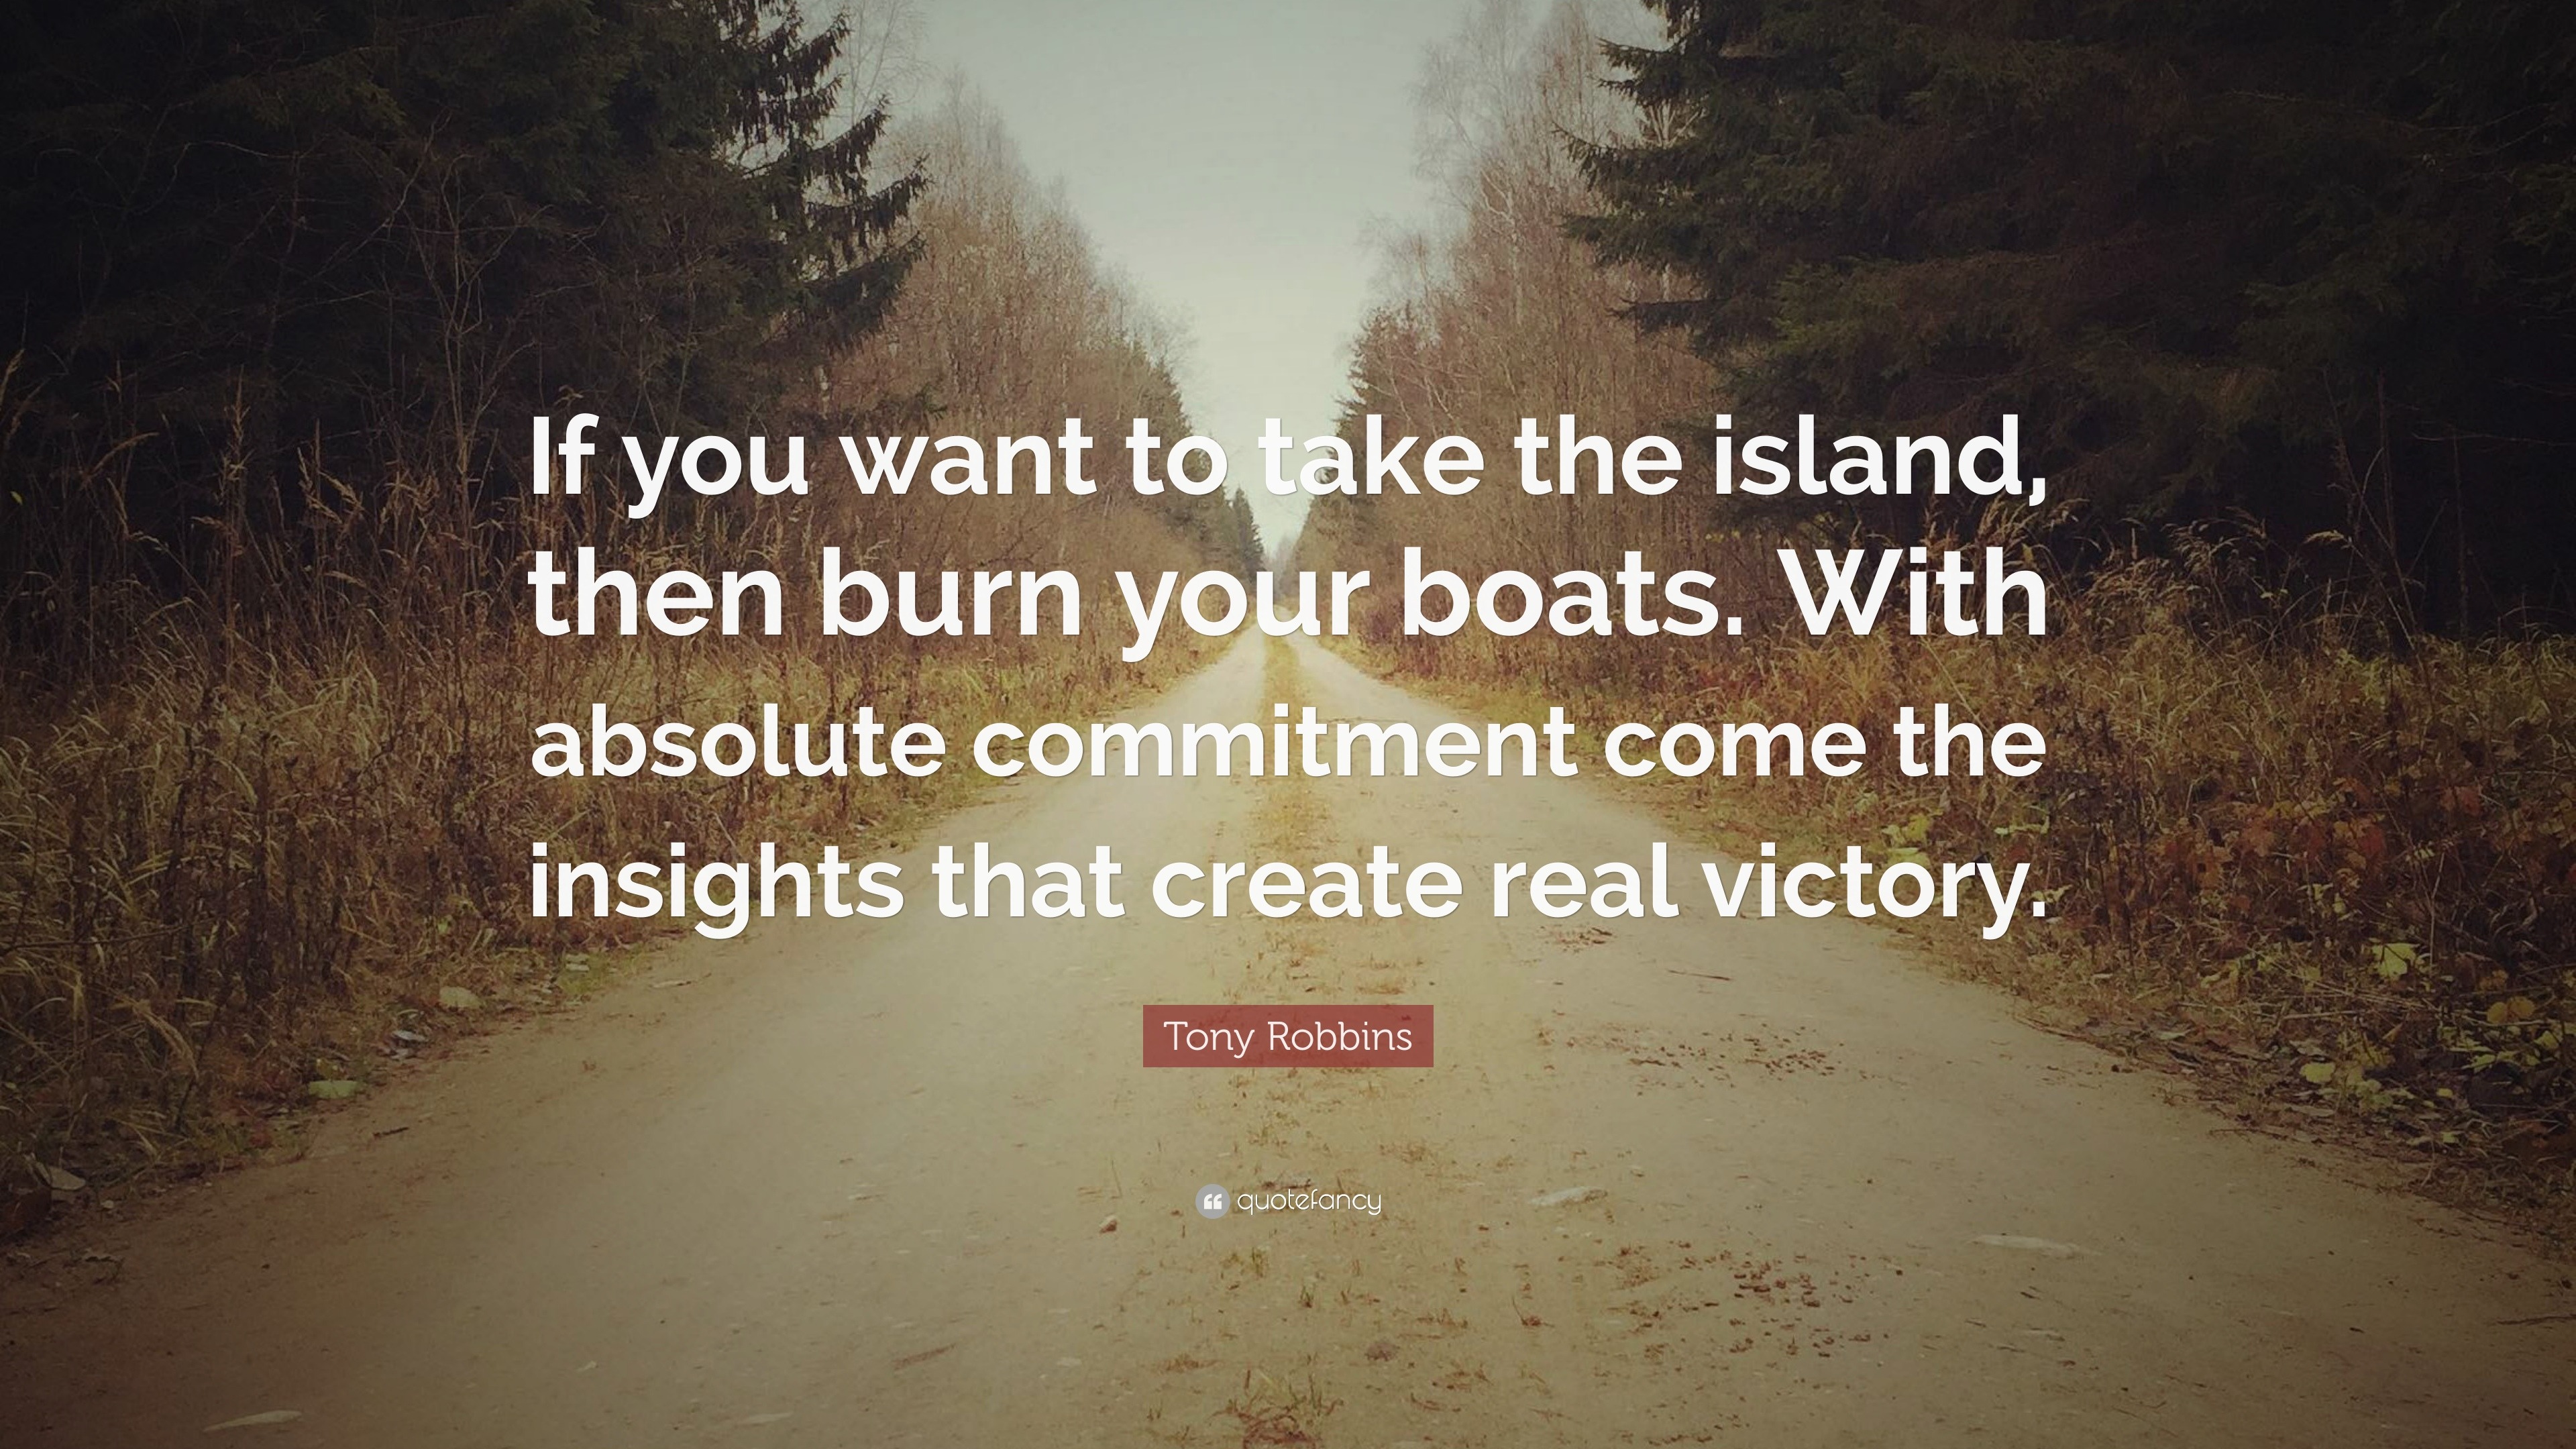 Tony Robbins Quote: “If you want to take the island, then burn your